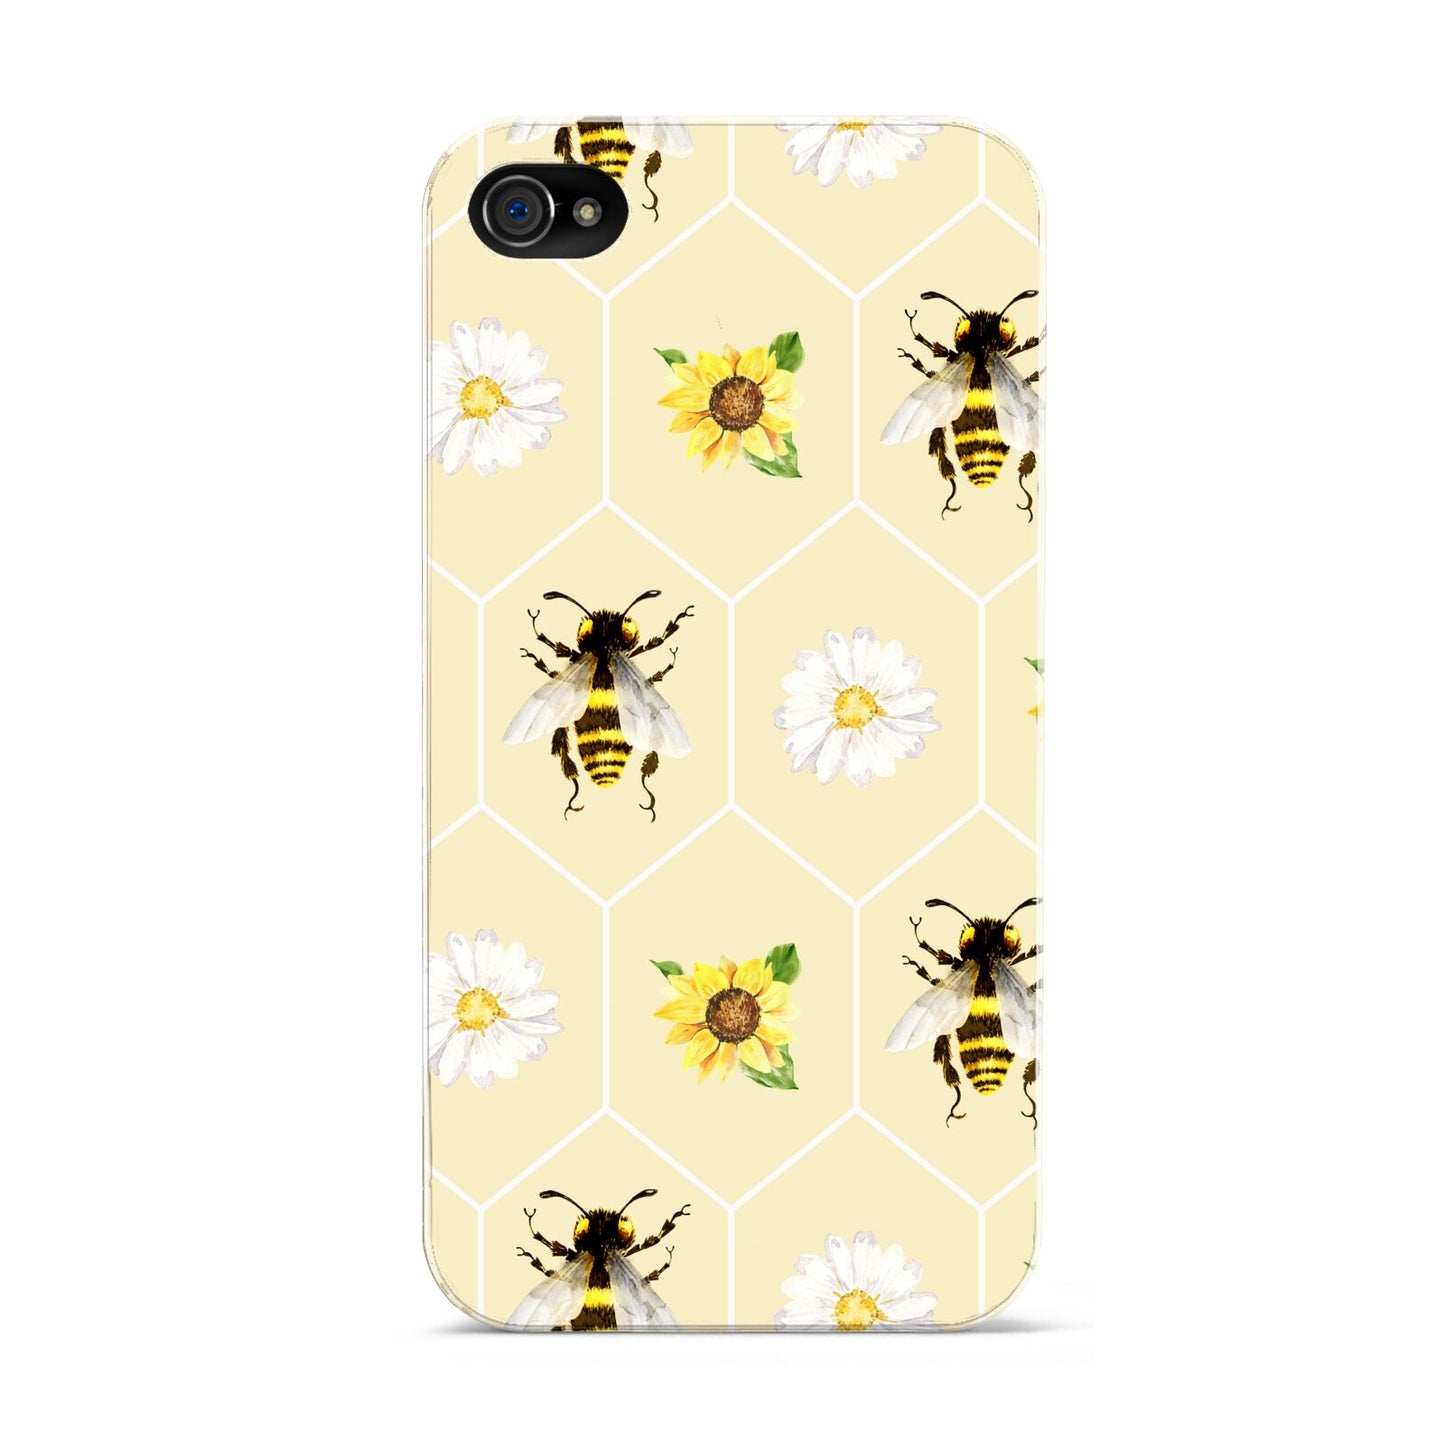 Daisies Bees and Sunflowers Apple iPhone 4s Case